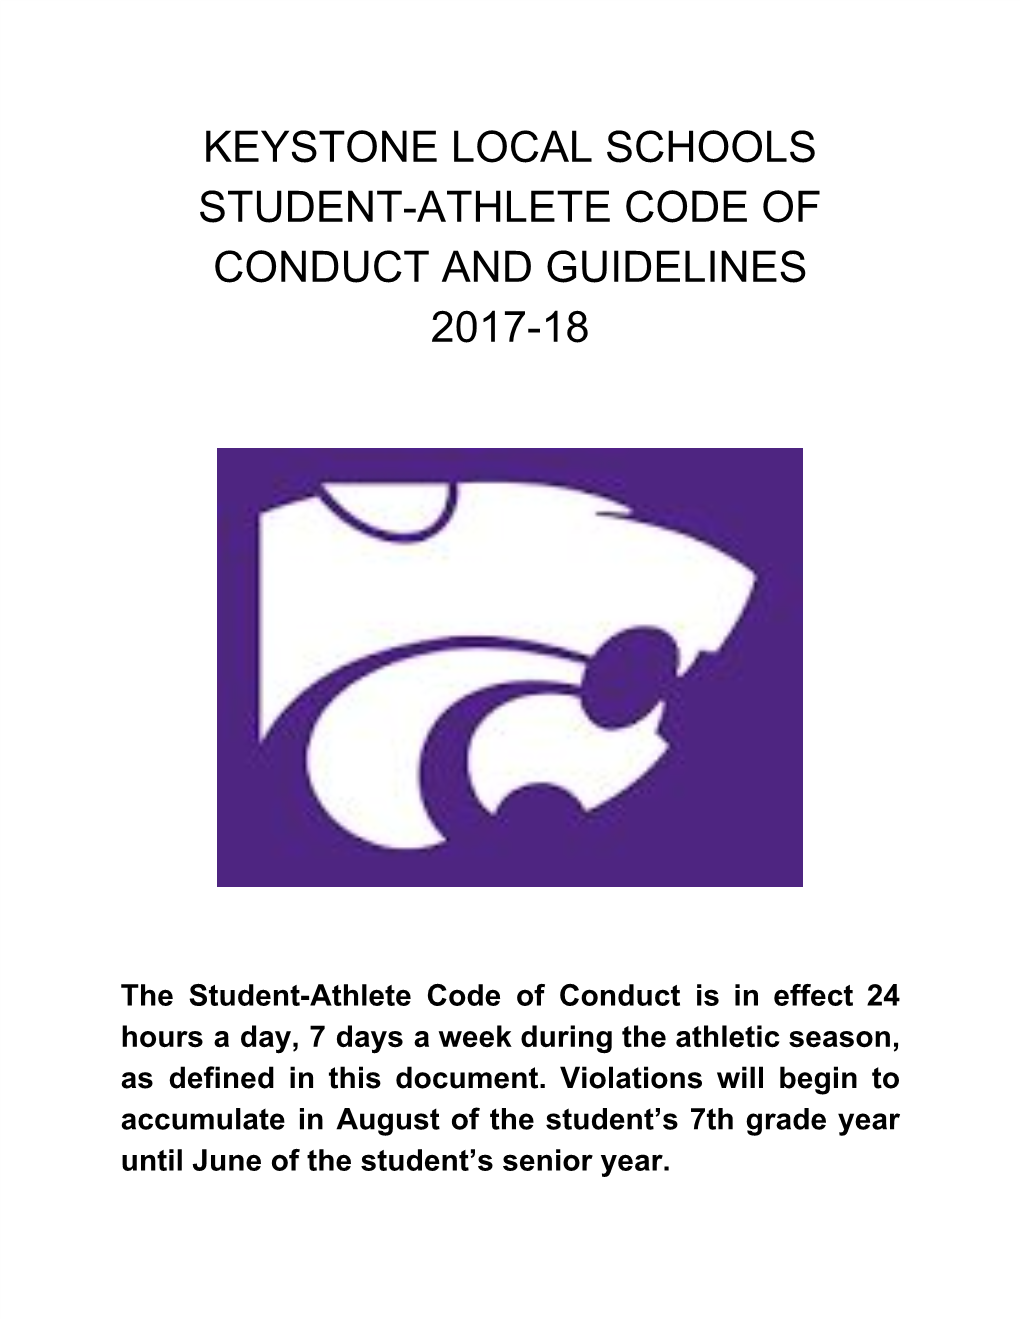 Keystone Local Schools Student-Athlete Code of Conduct and Guidelines 2017-18